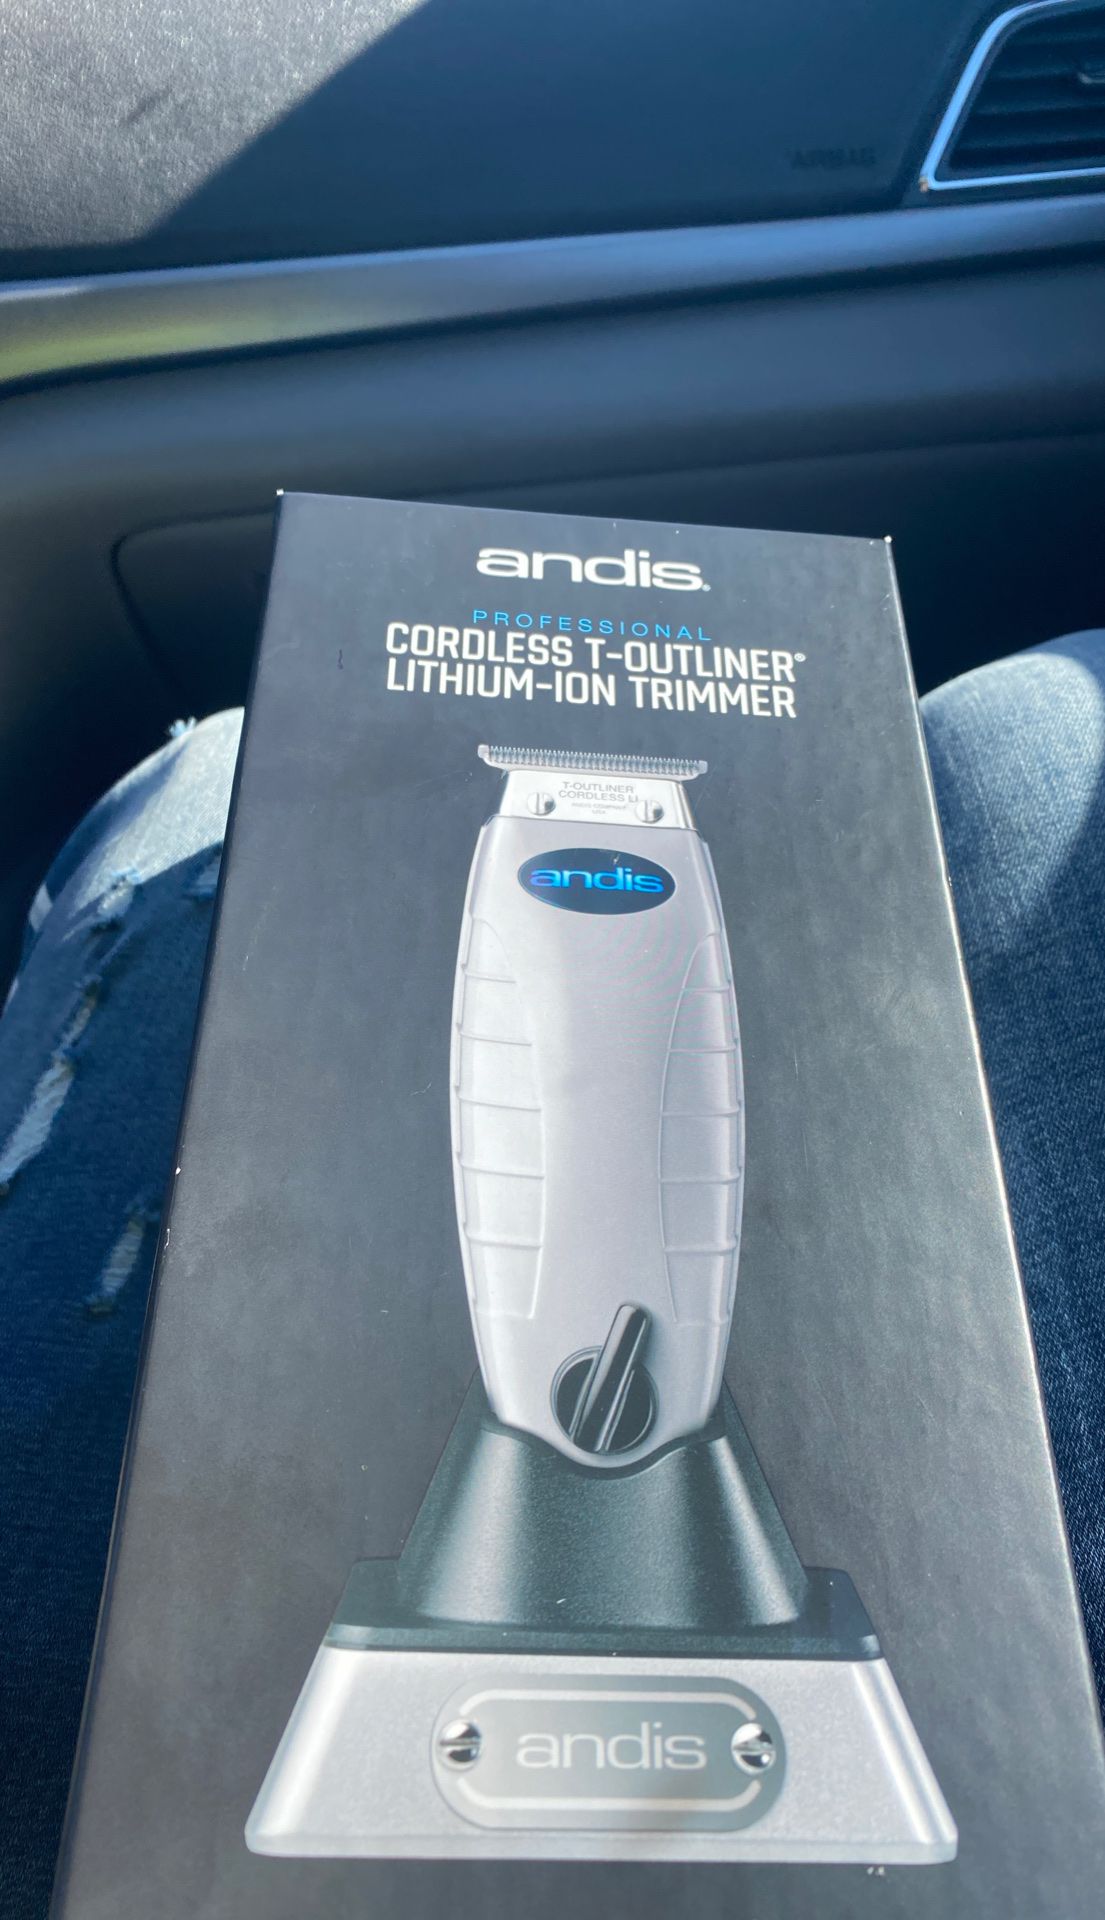 Andis cordless clippers $125